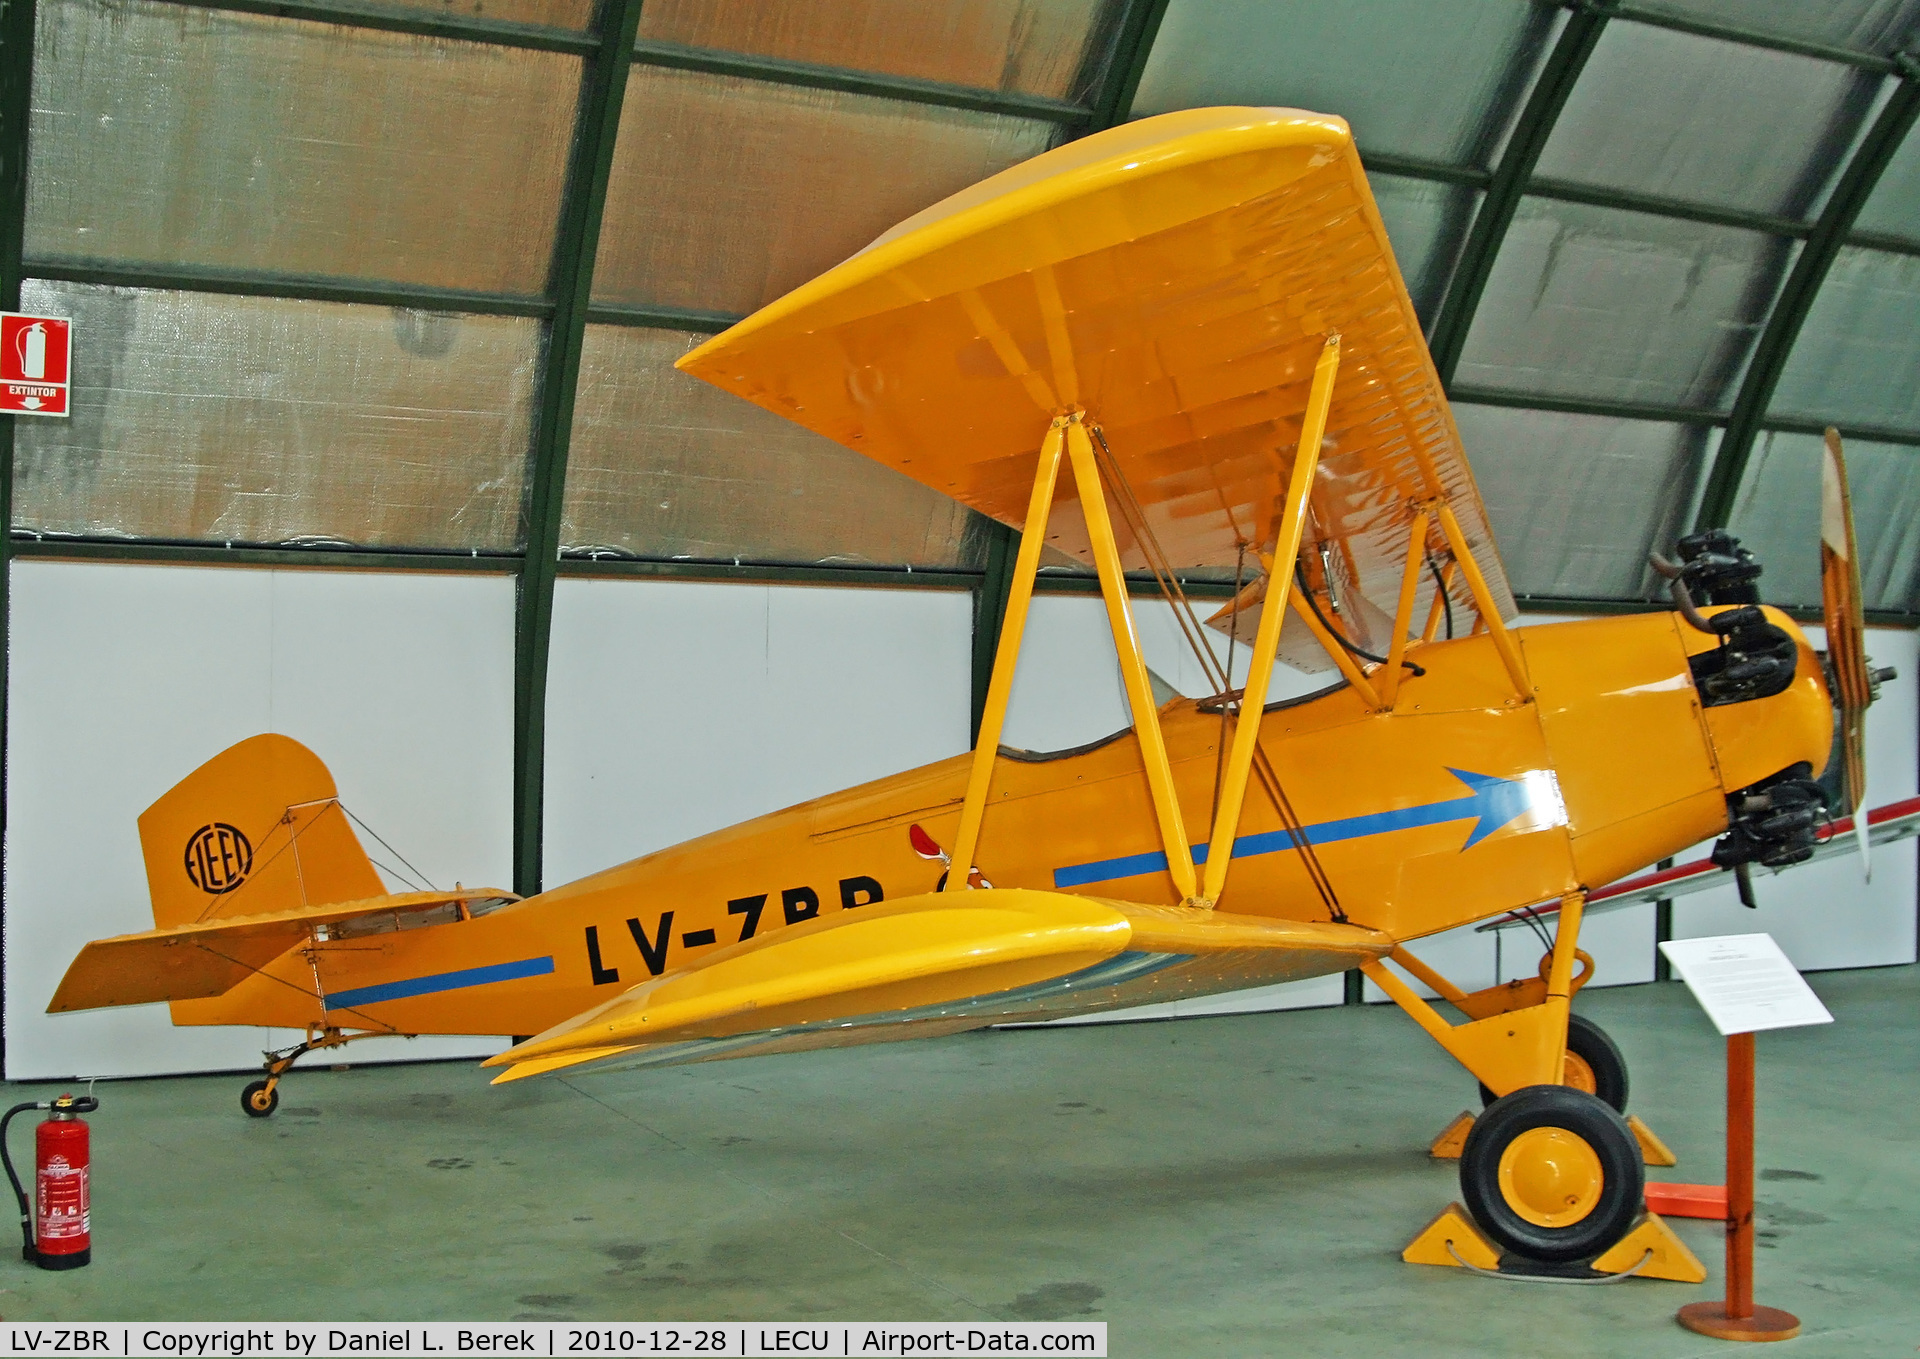 LV-ZBR, 1929 Fleet Model 2 C/N 177, Somehow this Golden Age biplane of the Argentine Aviation Authority ended up at the Museo del Aire in Madrid, Spain.